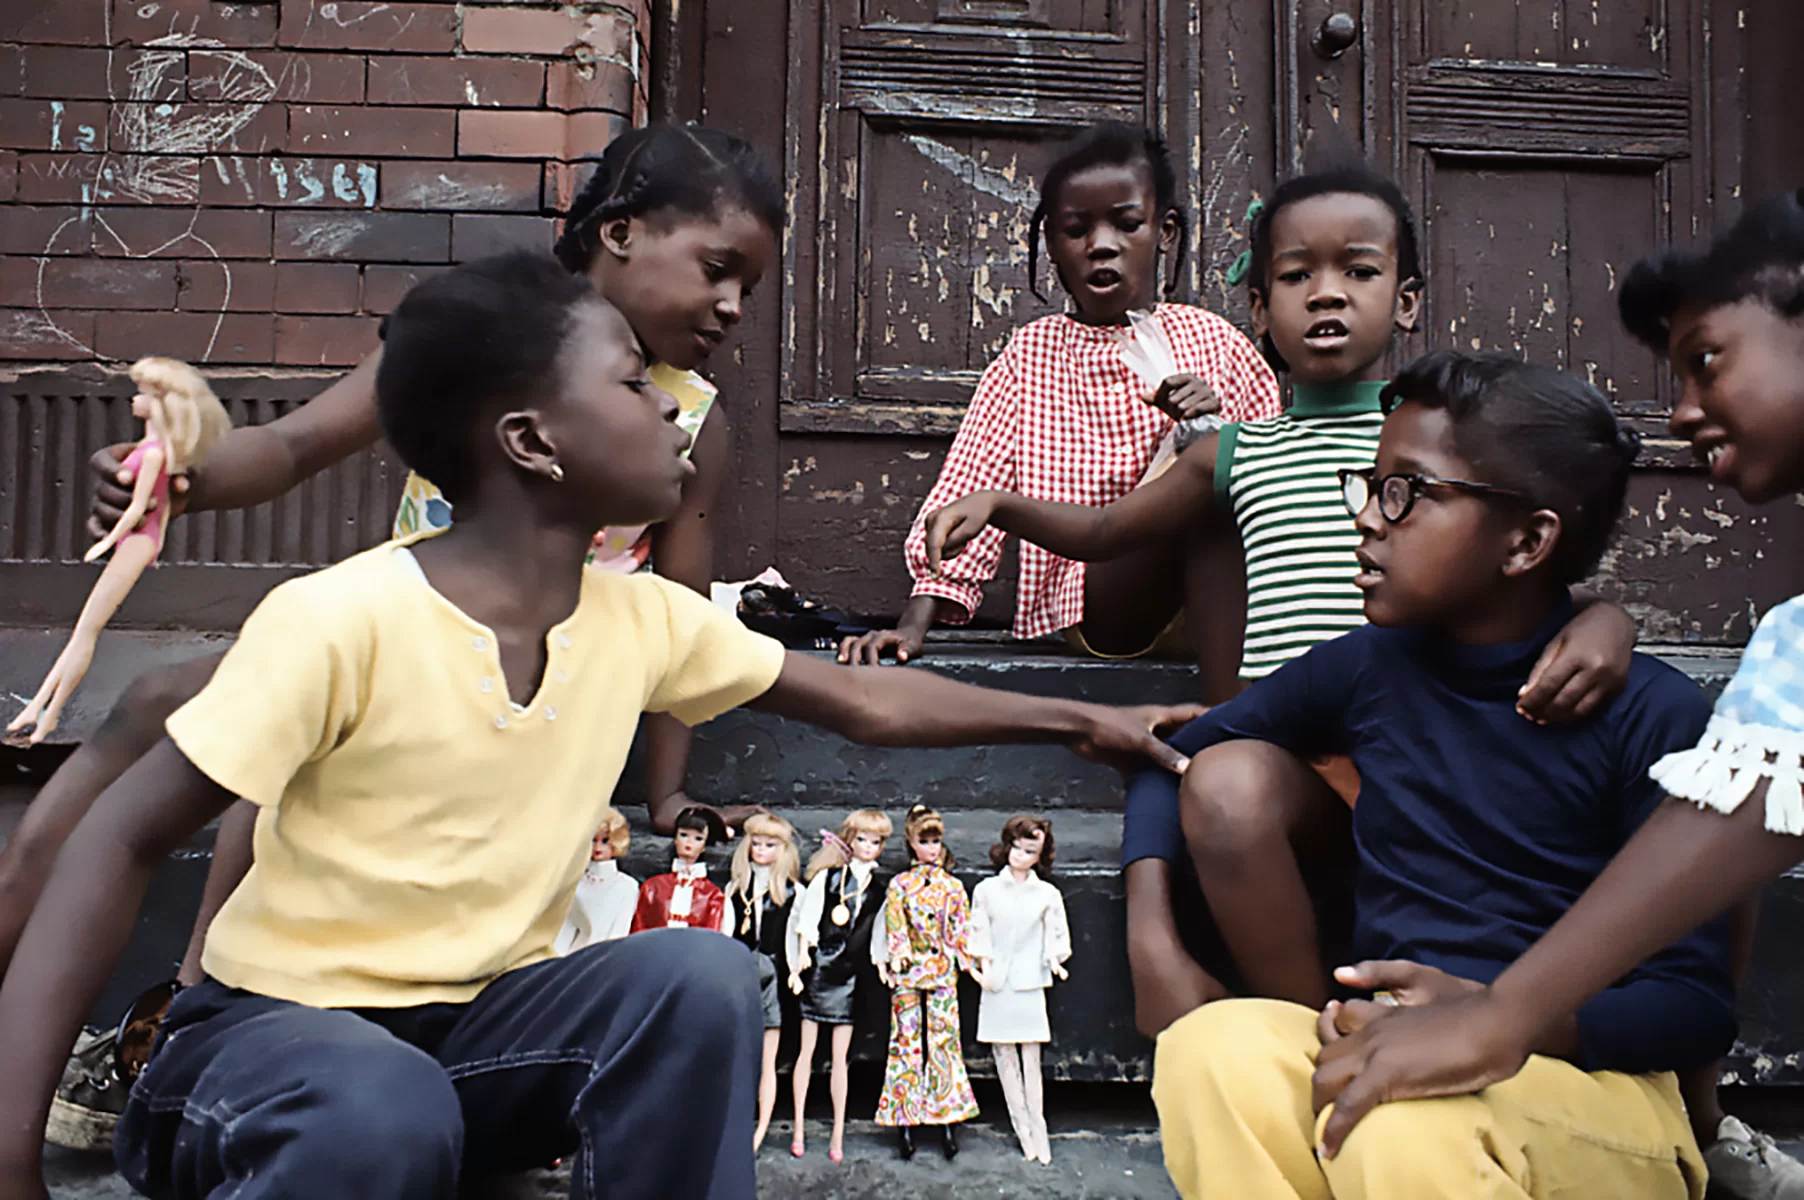 Girls play with Barbies in East Harlem, 1970

(Camilo J. Vergara, Camilo J. Vergara Photograph Collection, Library of Congress Prints and Photographs Division Washington https://www.loc.gov/item/2014648659/.